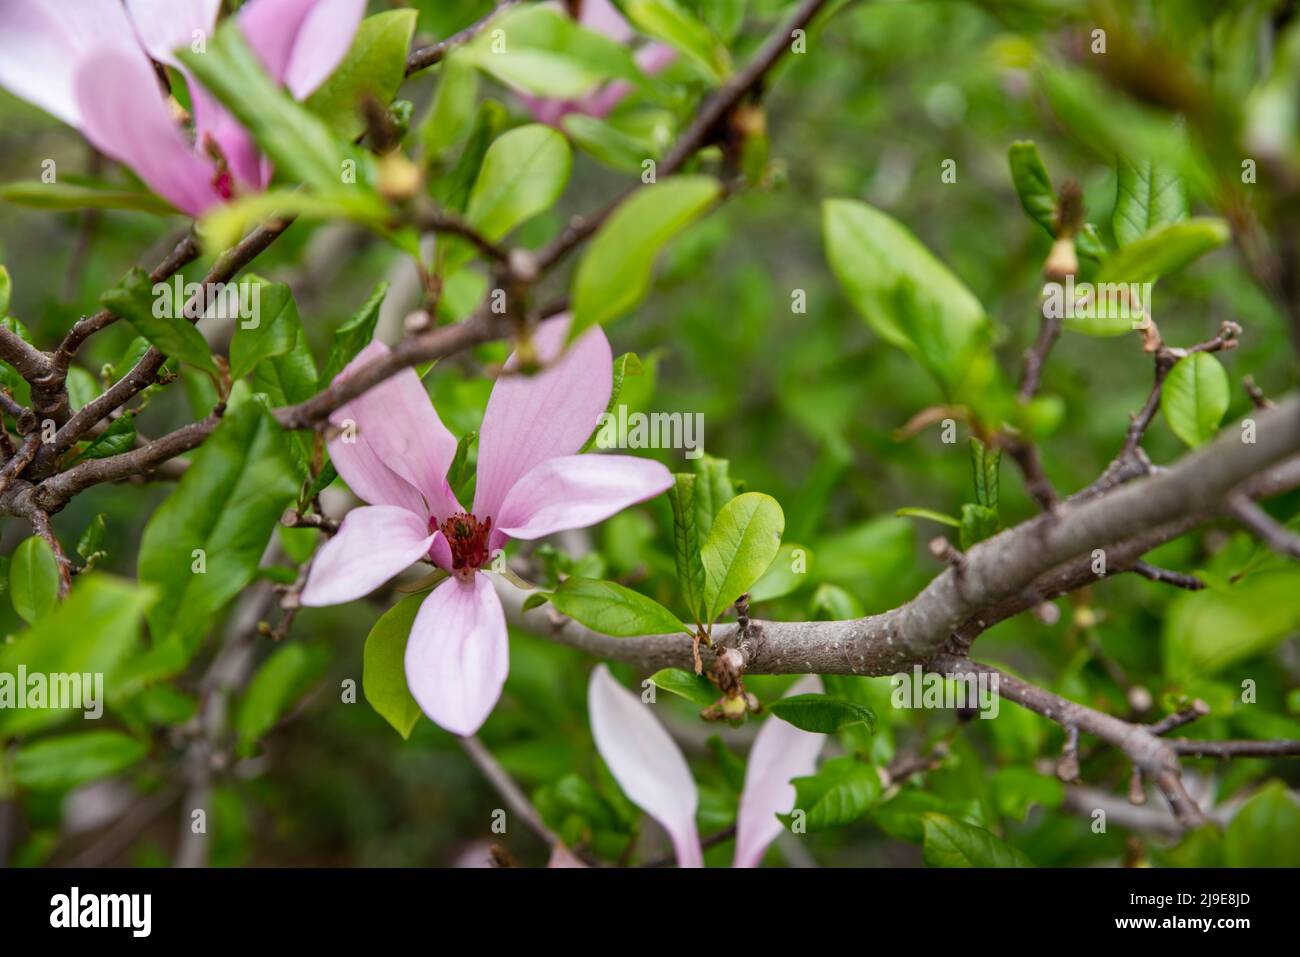 Flowering Magnolia tree branch closeup with green leaves pink blossoms Stock Photo